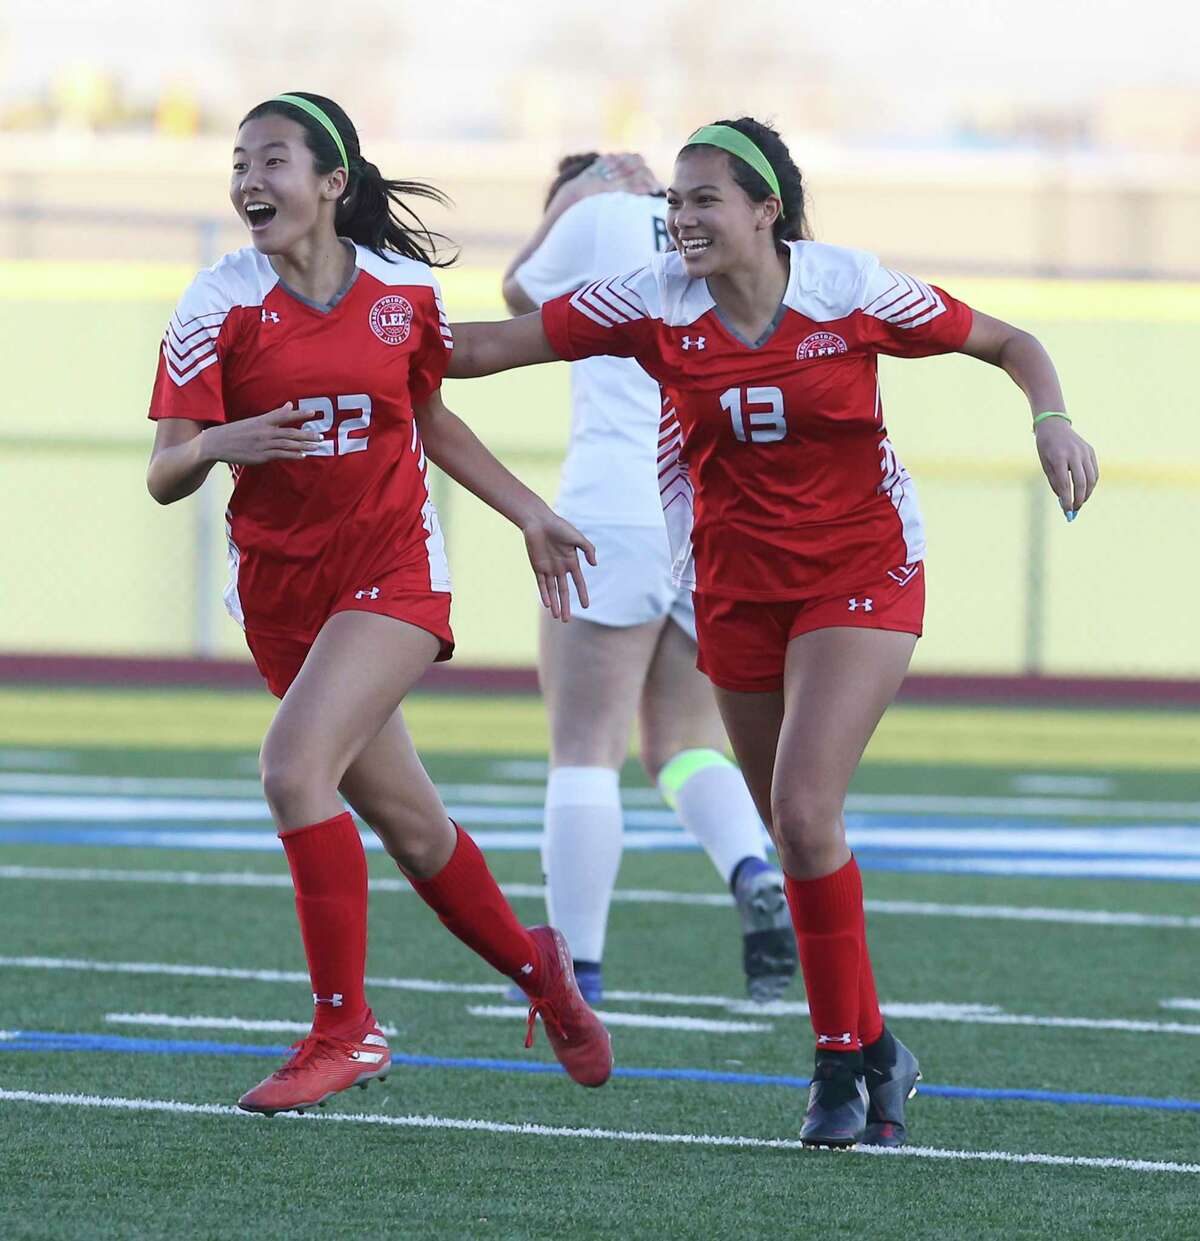 LEE's Kyleena Xin (22) celebrates with teammate Isela Zertuche (13) after Xin scores in the second half against Reagan during their girls soccer game at Commander Stadium on Wednesday, Feb. 12, 2020. LEE defeated Reagan, 1-0, on Xin's score.